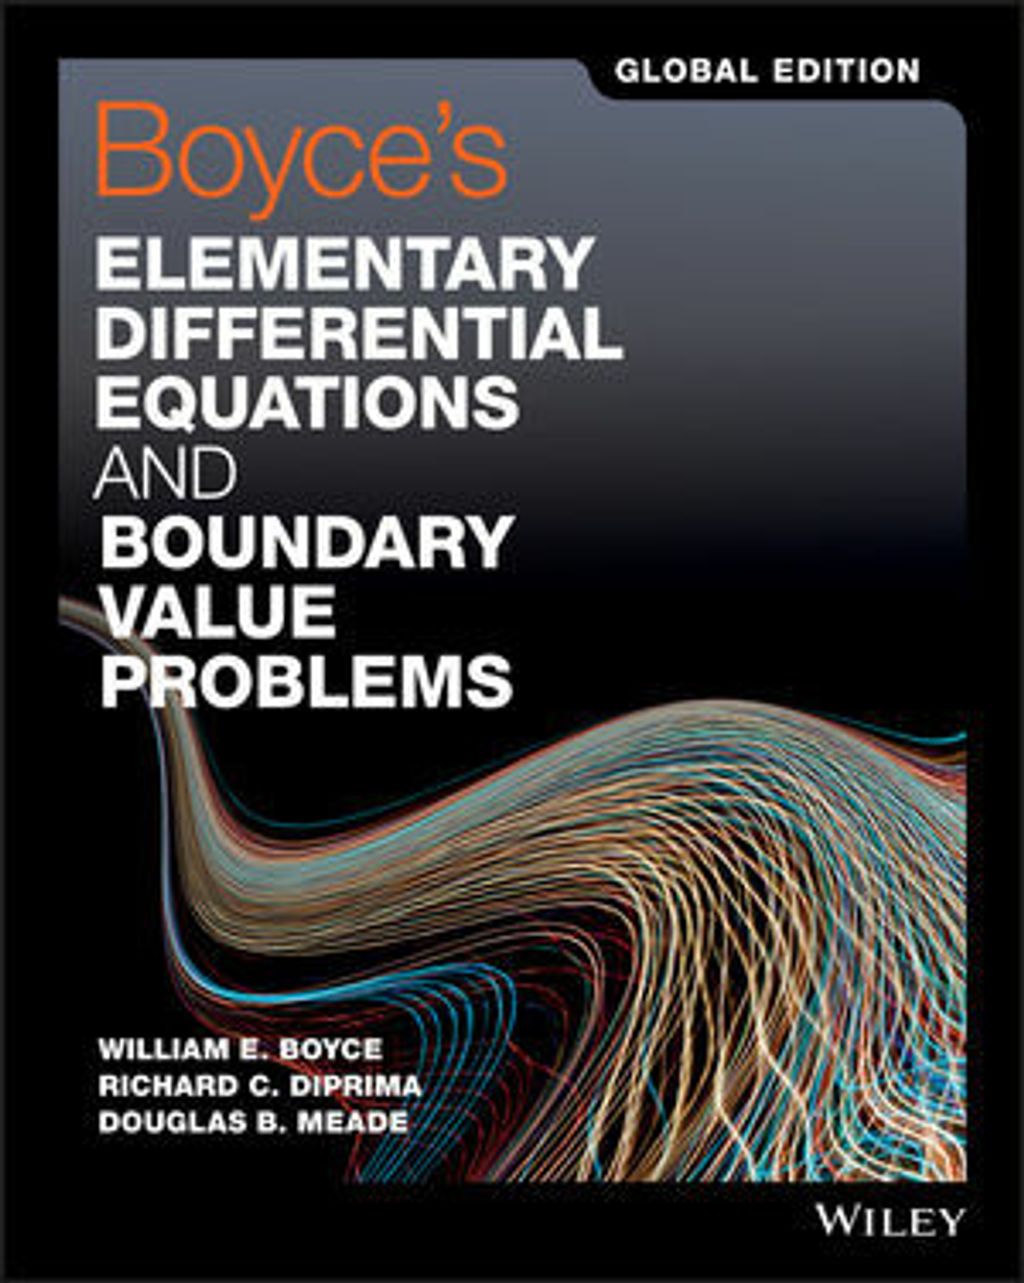 9781119382874 Elementary Differential Equations and Boundary Value Problems Boyce 11E GE.jpg